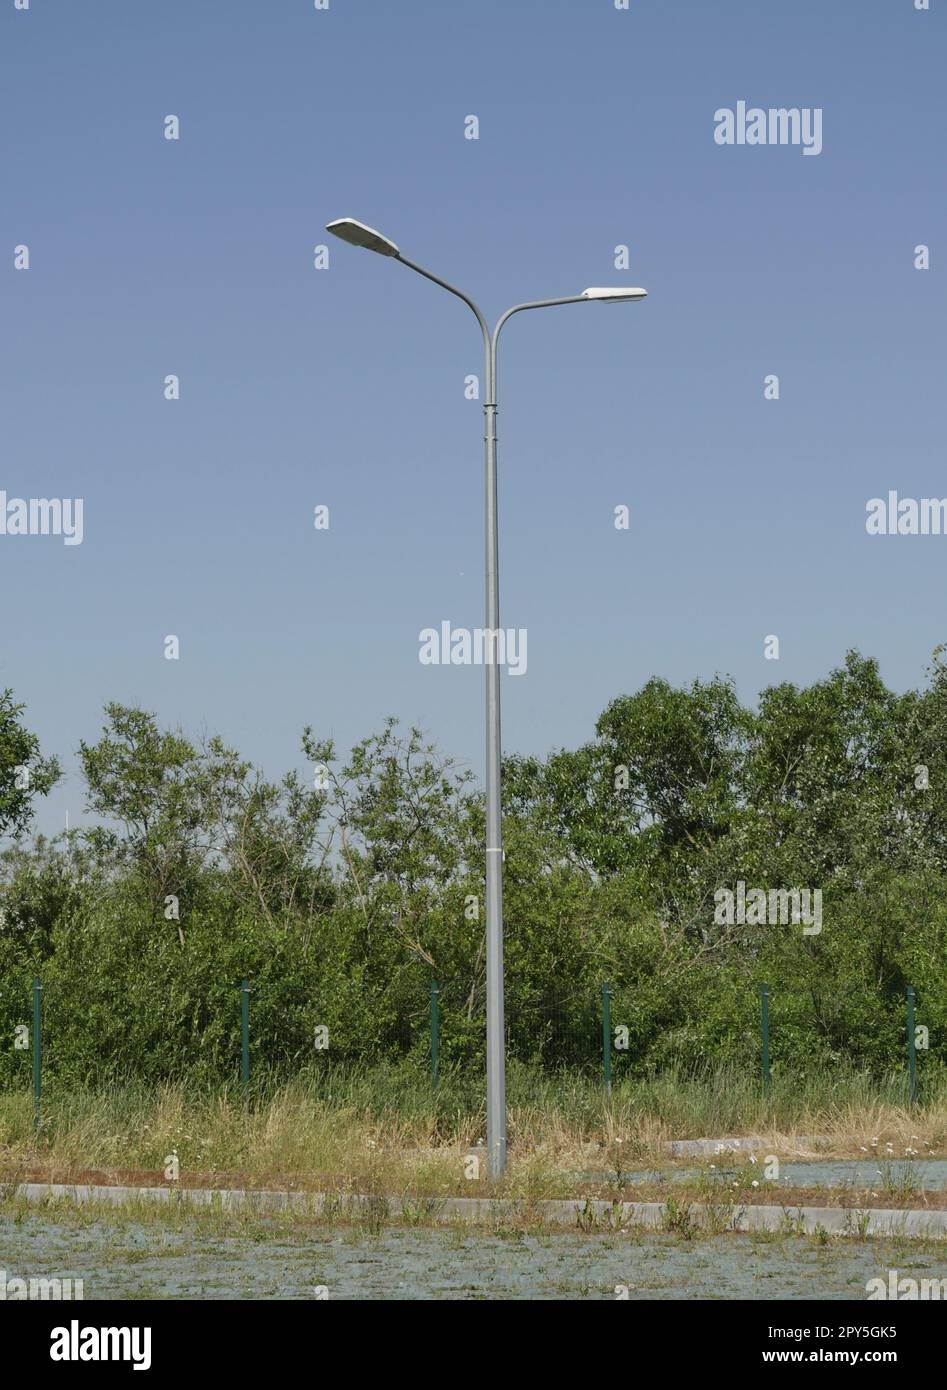 one street pole with two lanterns in nature Stock Photo